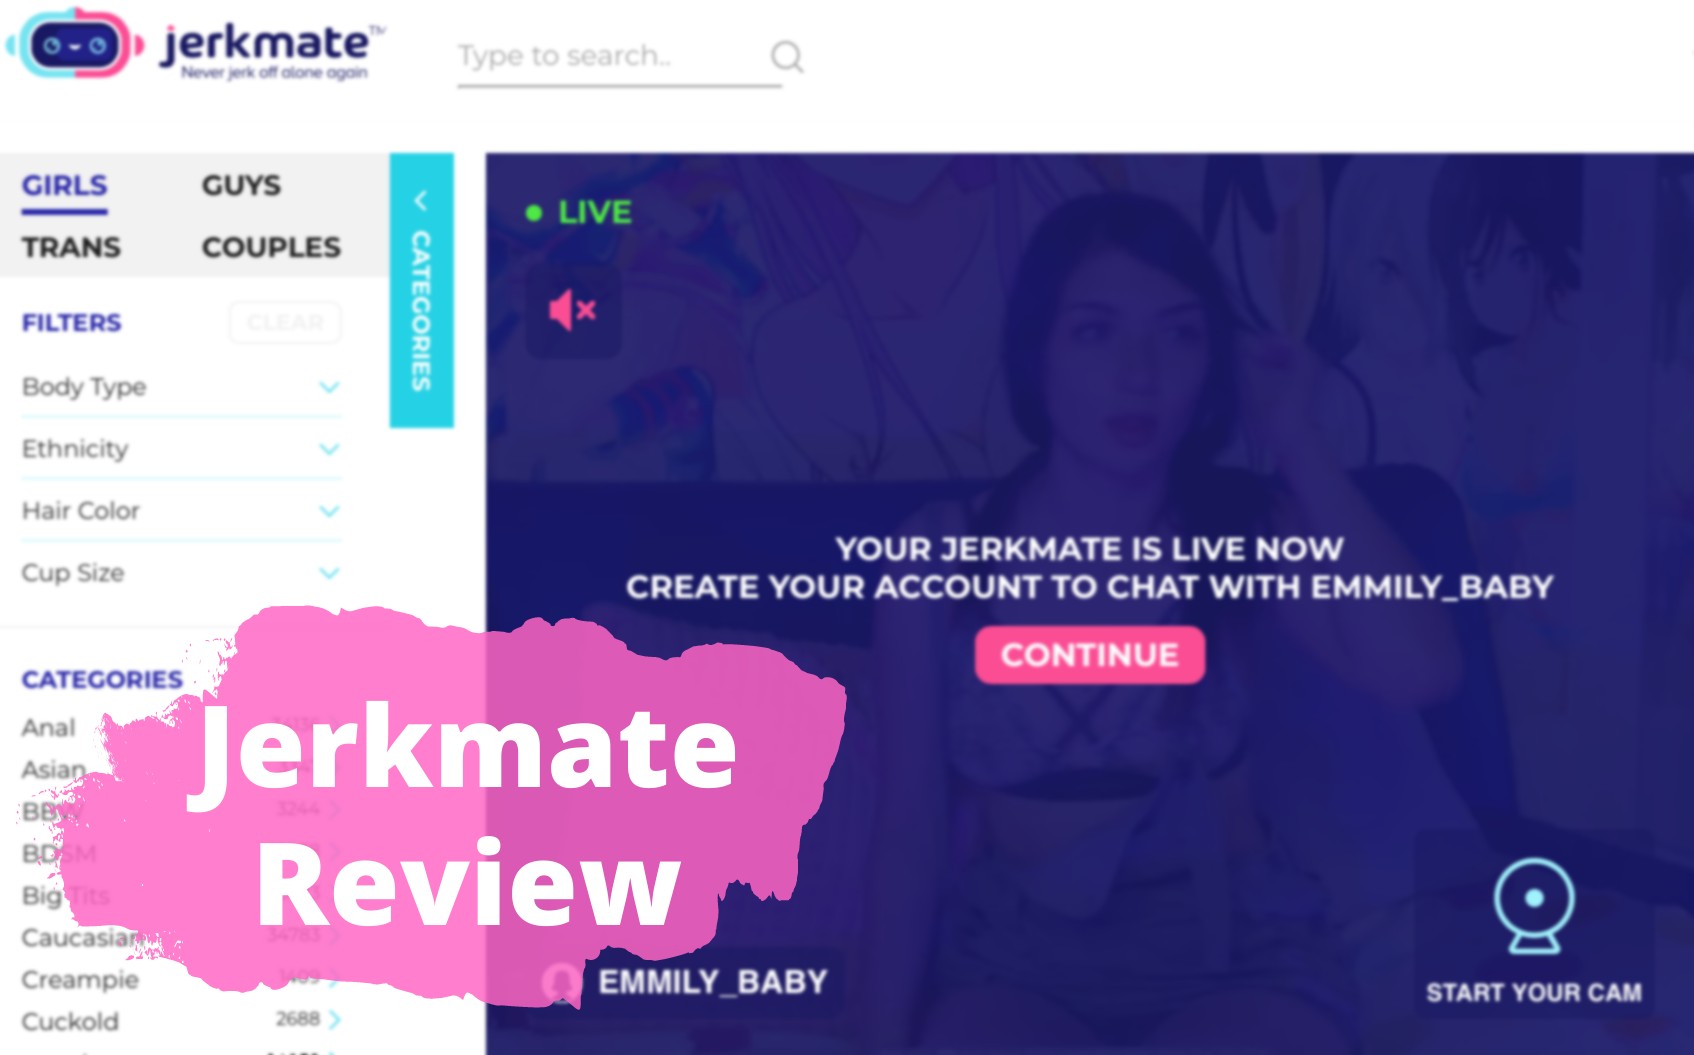 Jerkmate Review Is Their Membership Worth Using? My experience with the uber popular cam site, Jerkmate pic